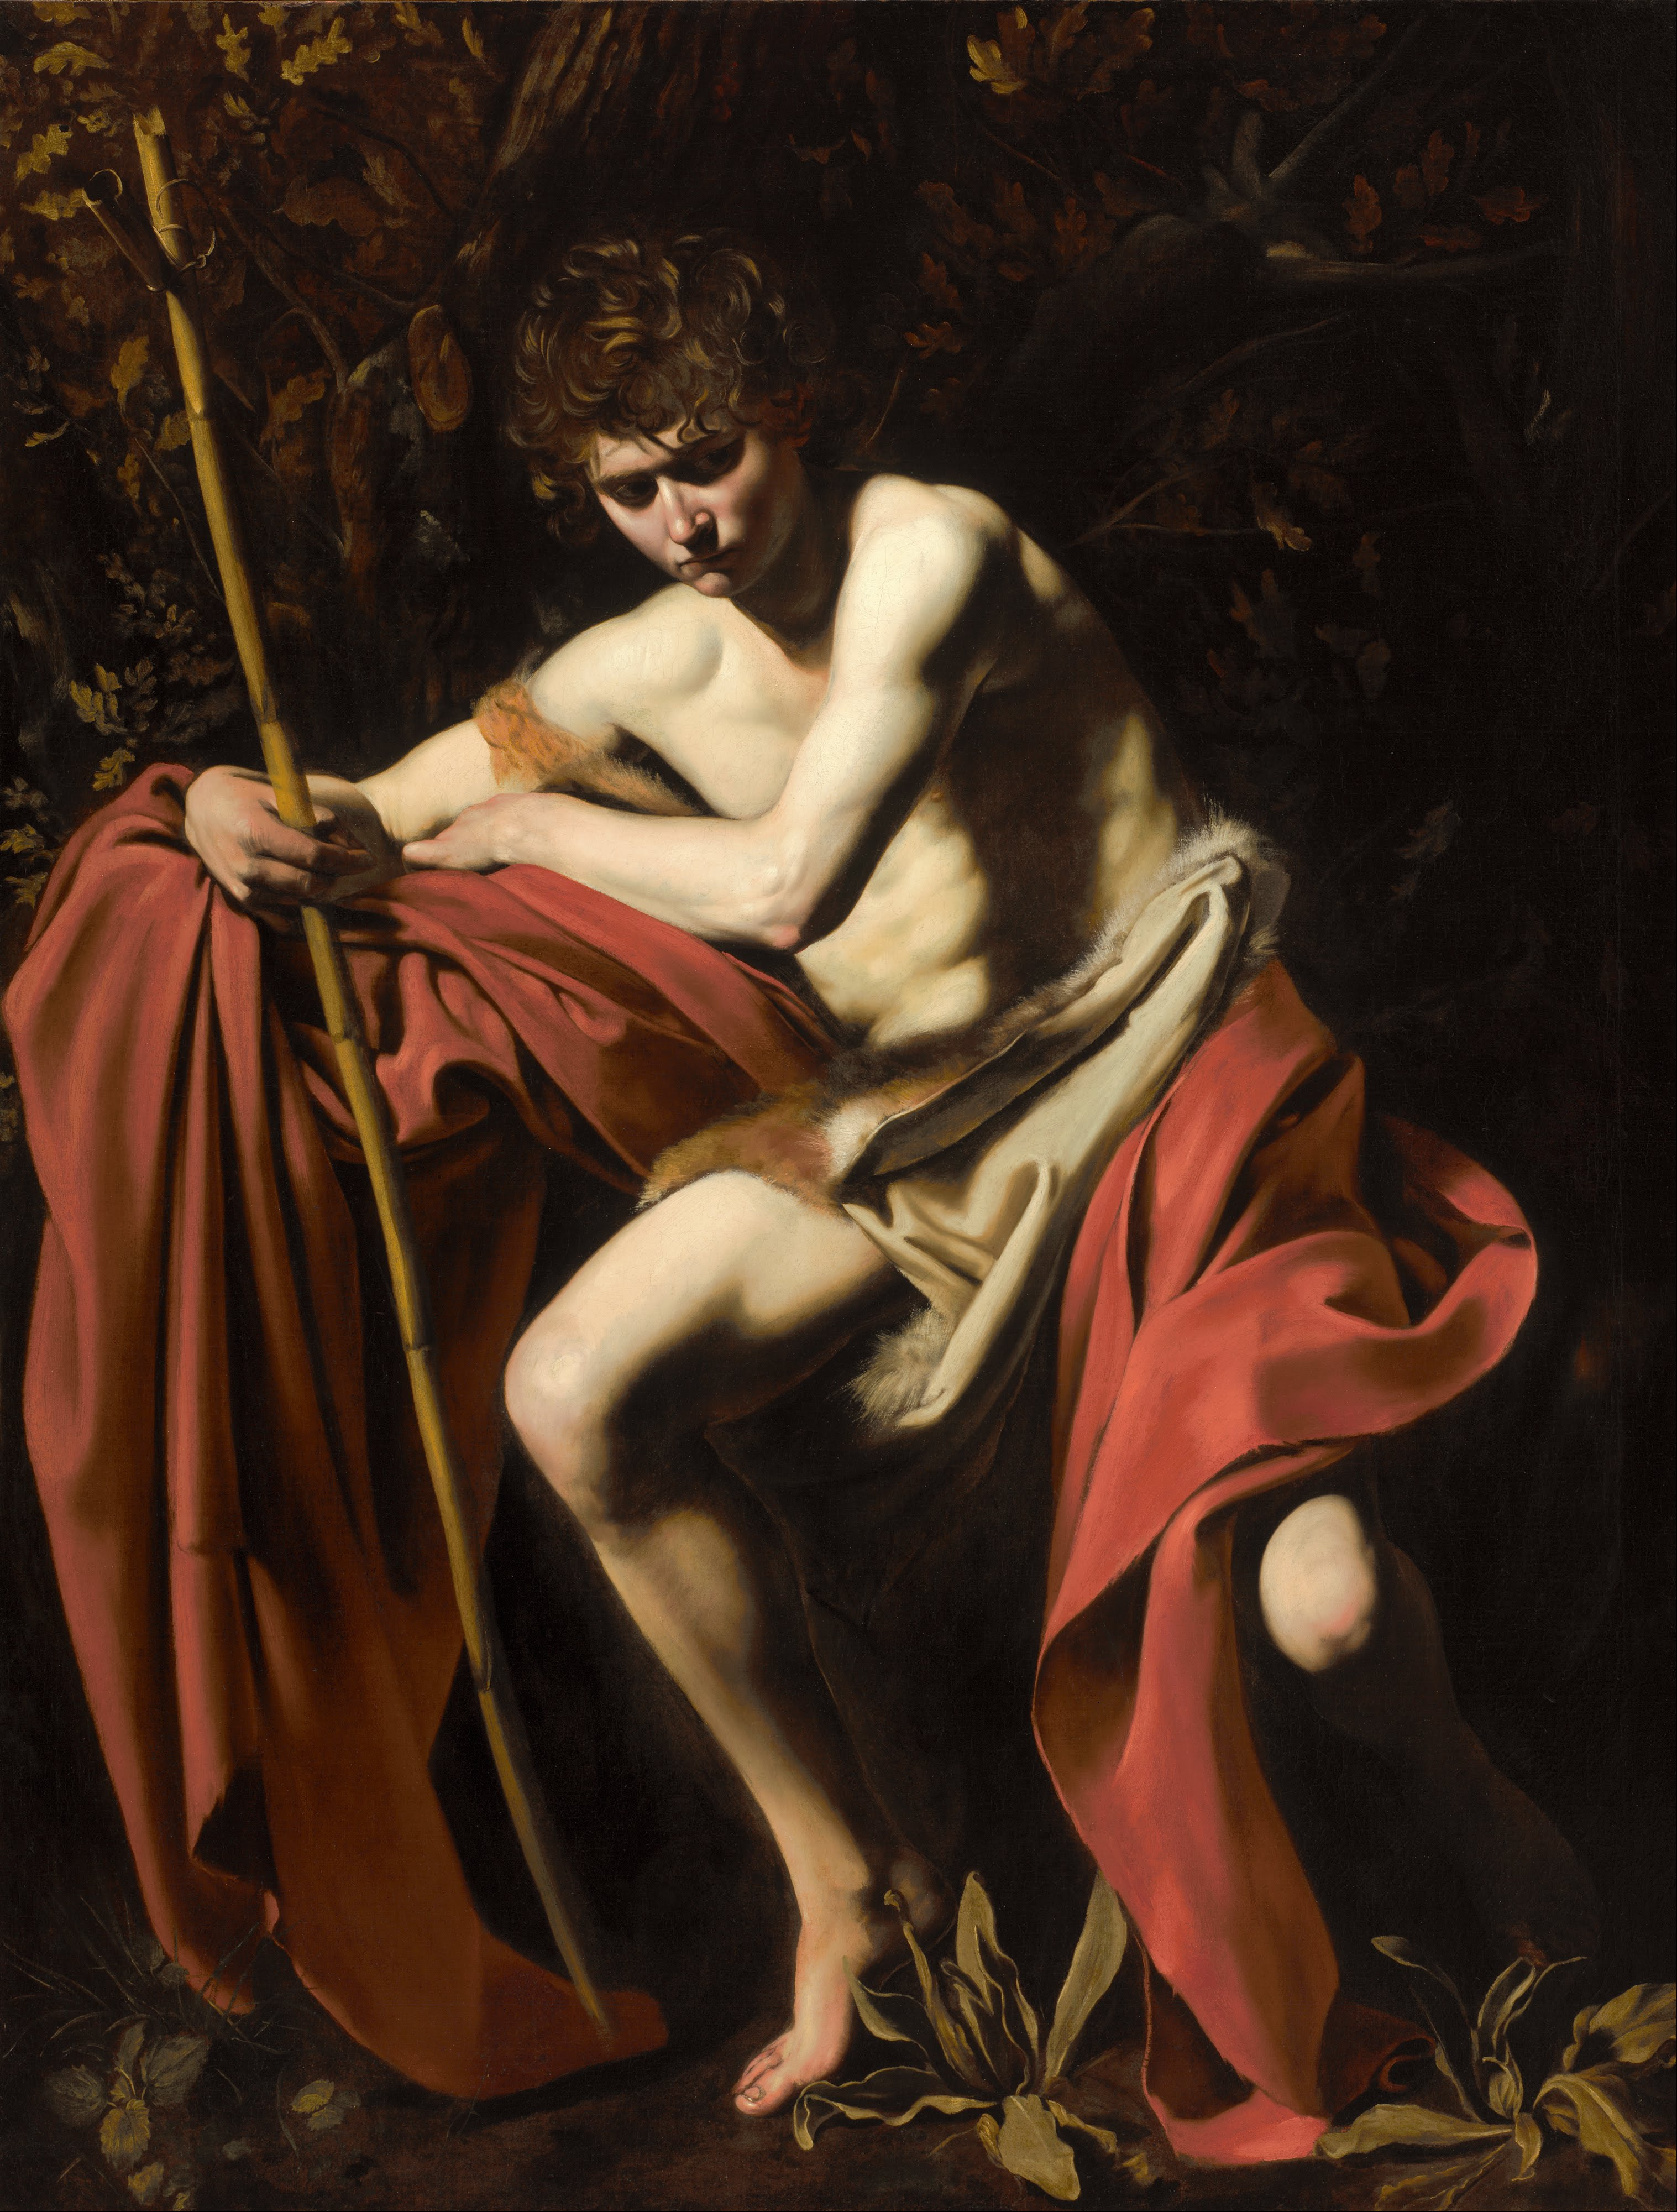 Saint John the Baptist in the Wilderness by  Caravaggio - circa 1604 - 172.72 x 132.08 cm Nelson-Atkins Museum of Art